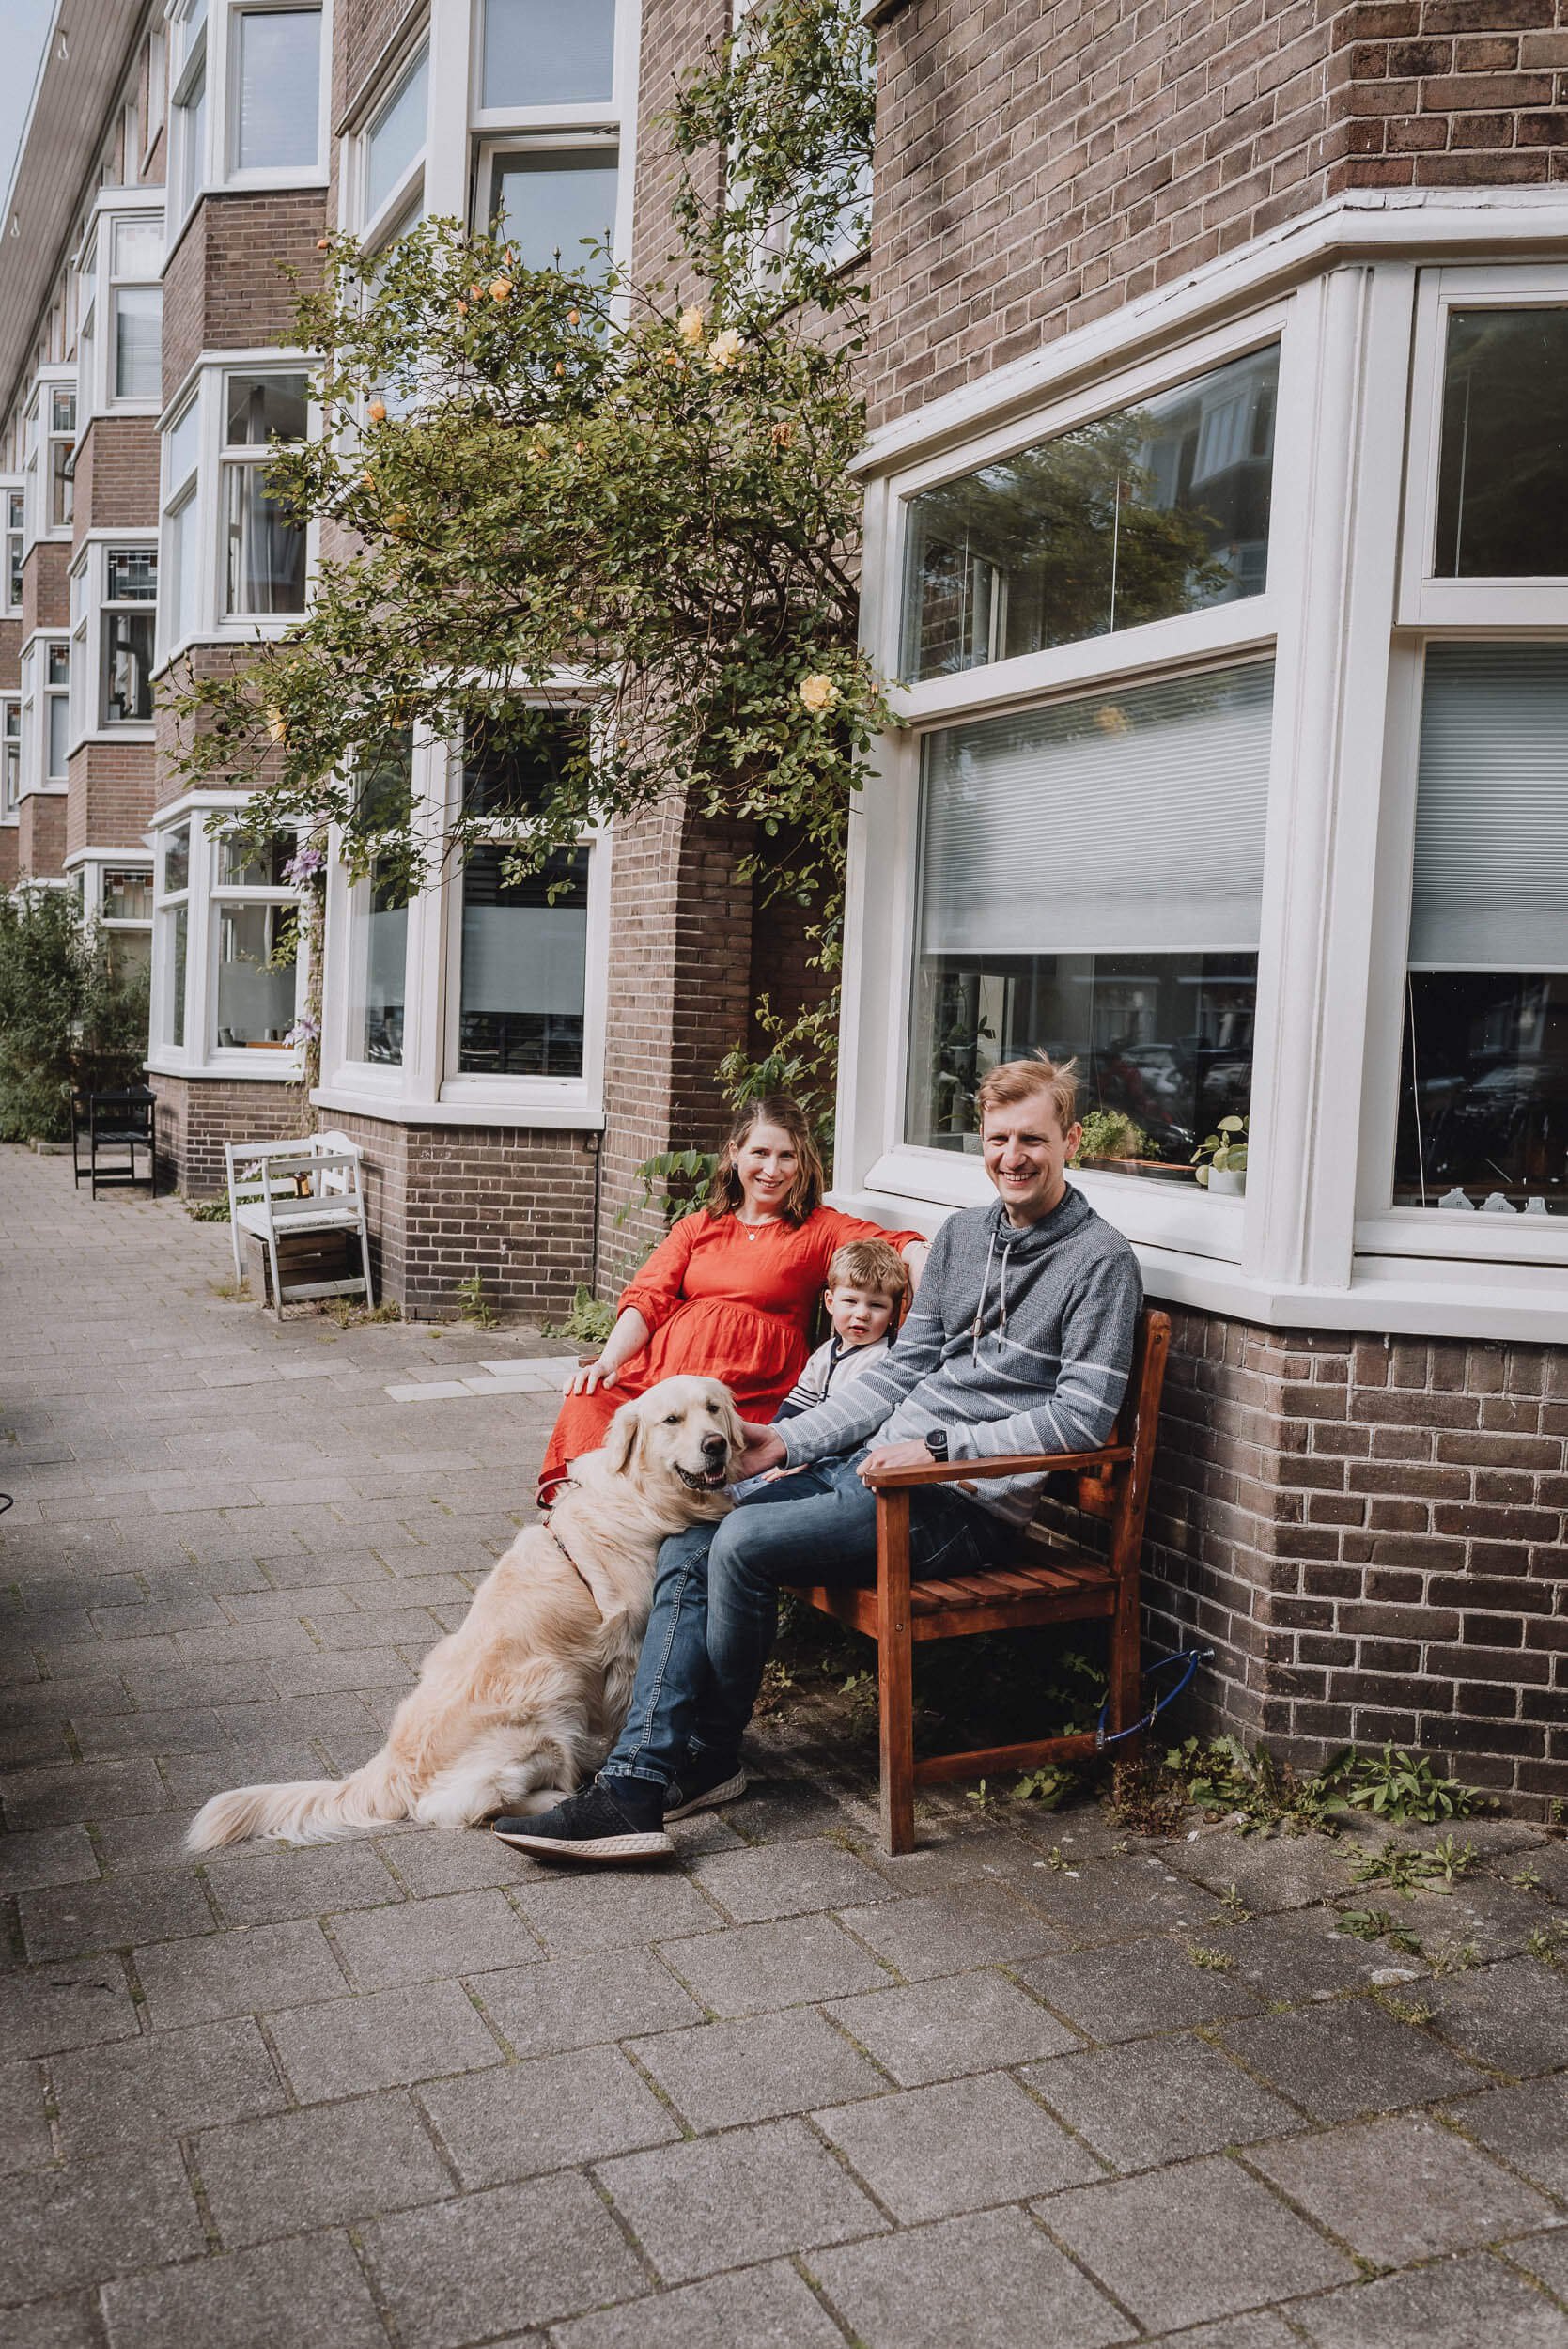 Vicky McLachlan Photography | Amsterdam Maternity Photographer | Singels family_26